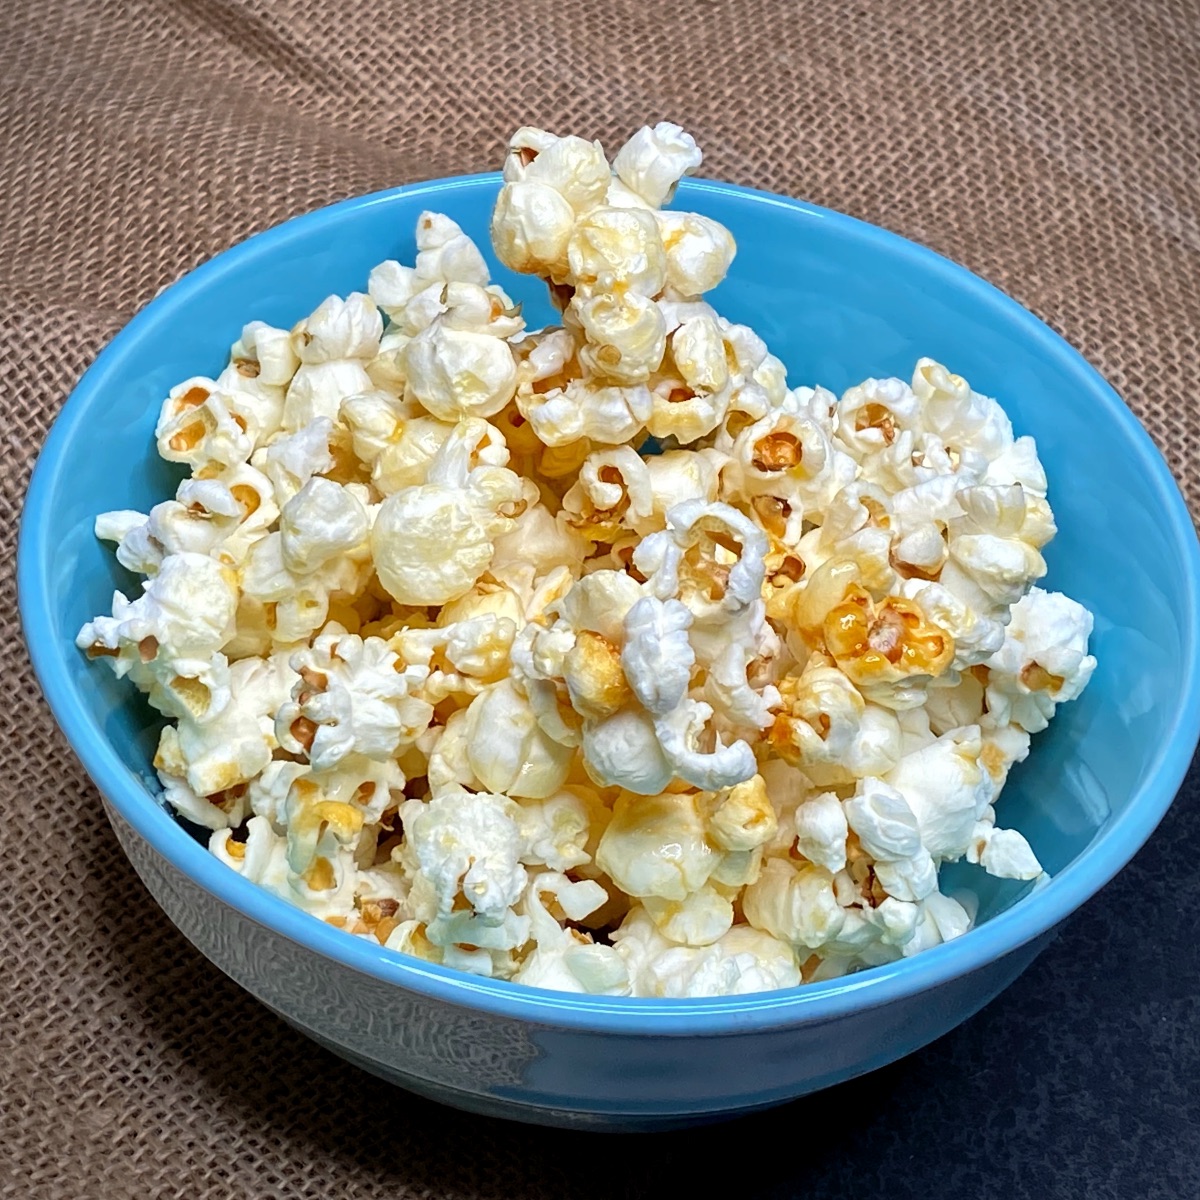 Top view of a bowl of homemade kettle corn in a blue bowl on a burlap table runner.